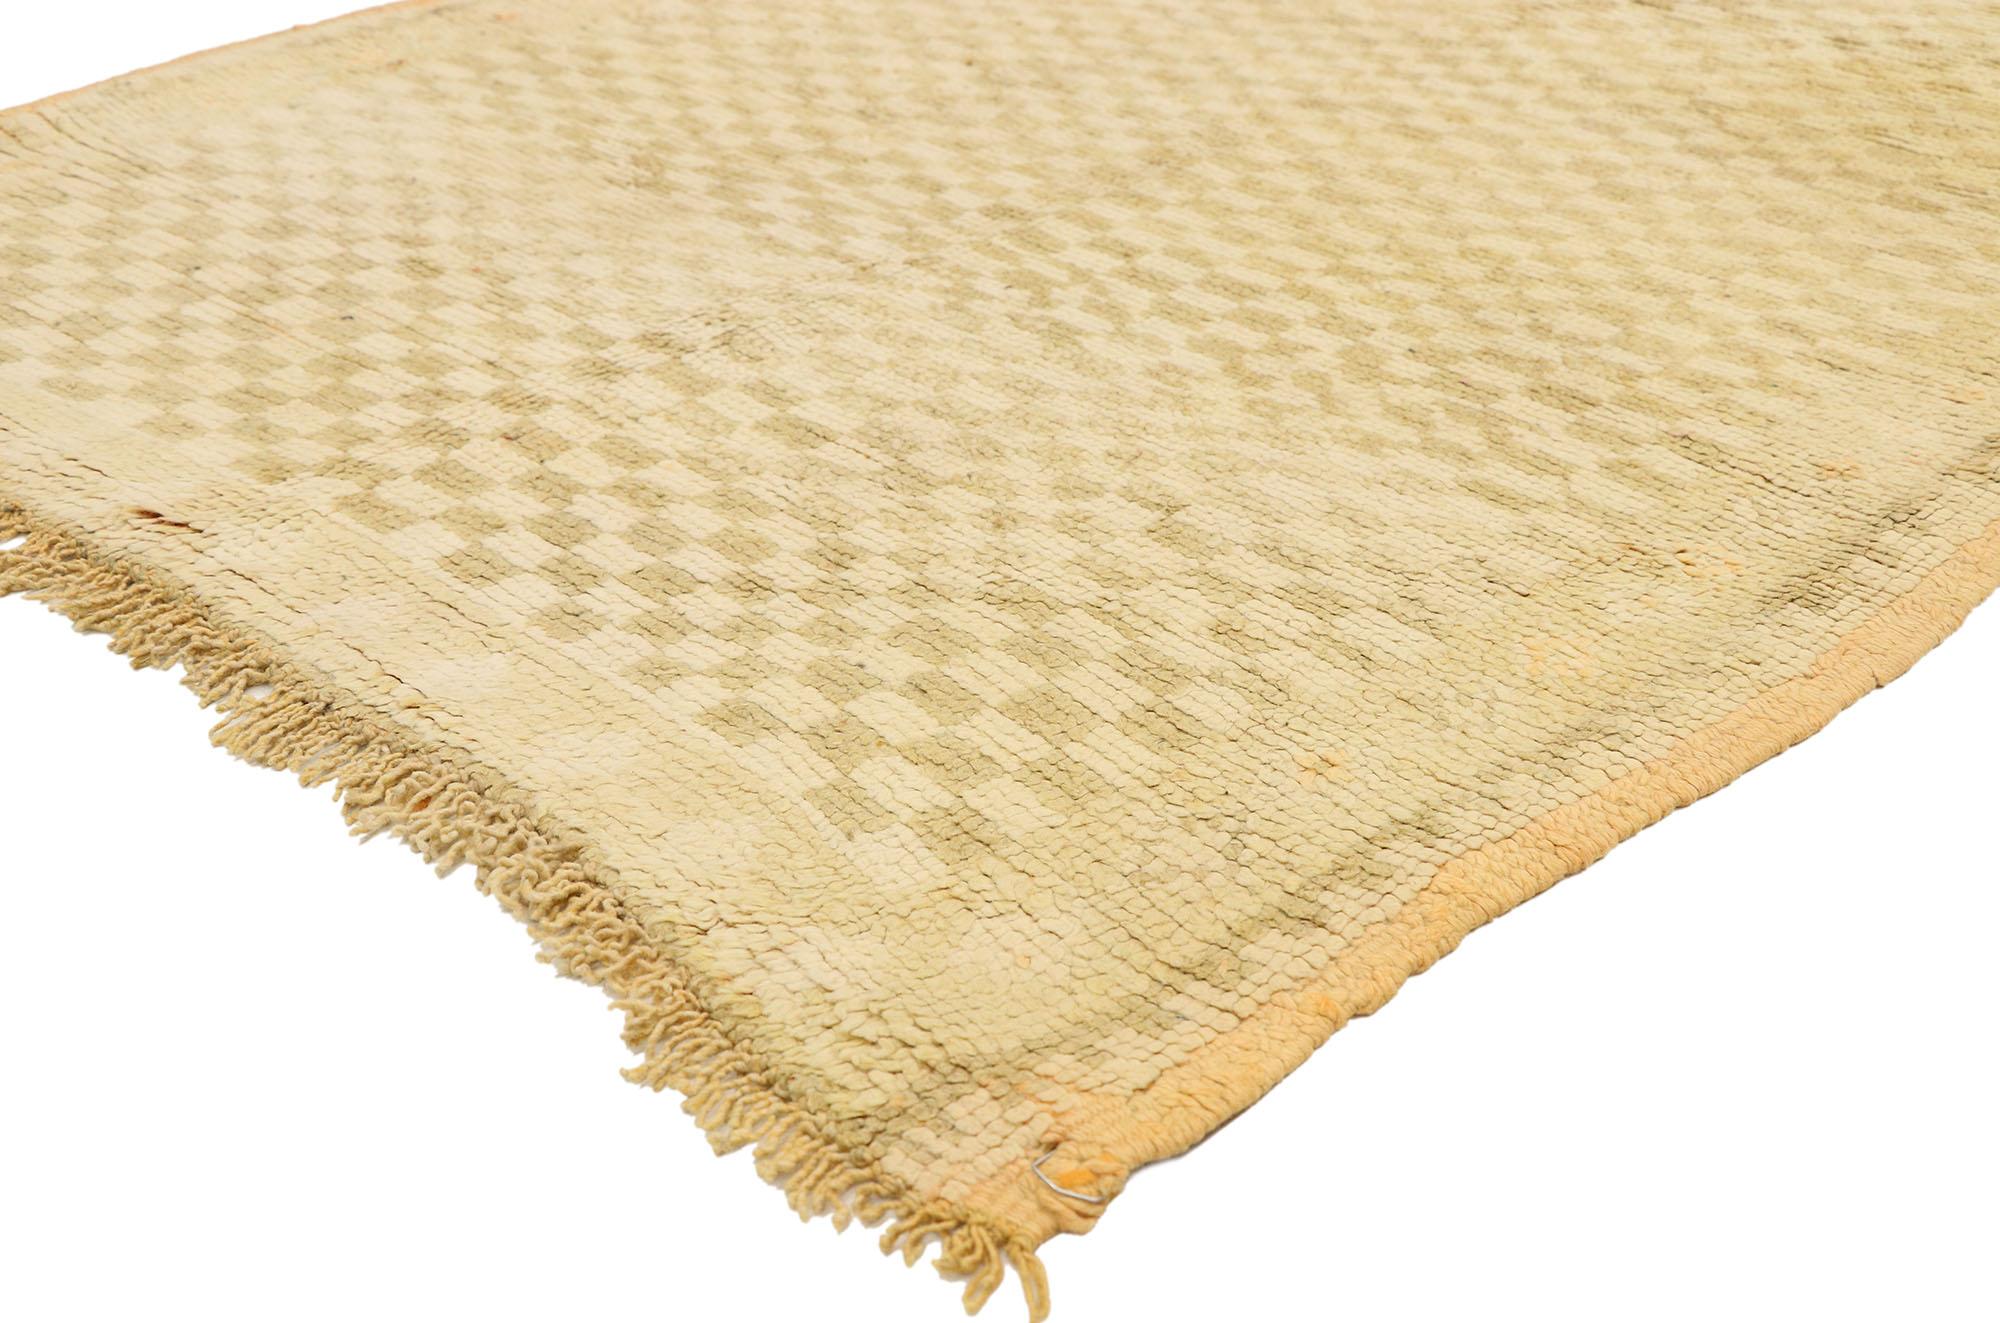 20225 Vintage Berber Moroccan runner with muted checkerboard pattern, hallway runner. This hand knotted wool Vintage Berber Moroccan runner features a muted checkerboard pattern framed with a three-sided border composed of diamonds, flanked by a